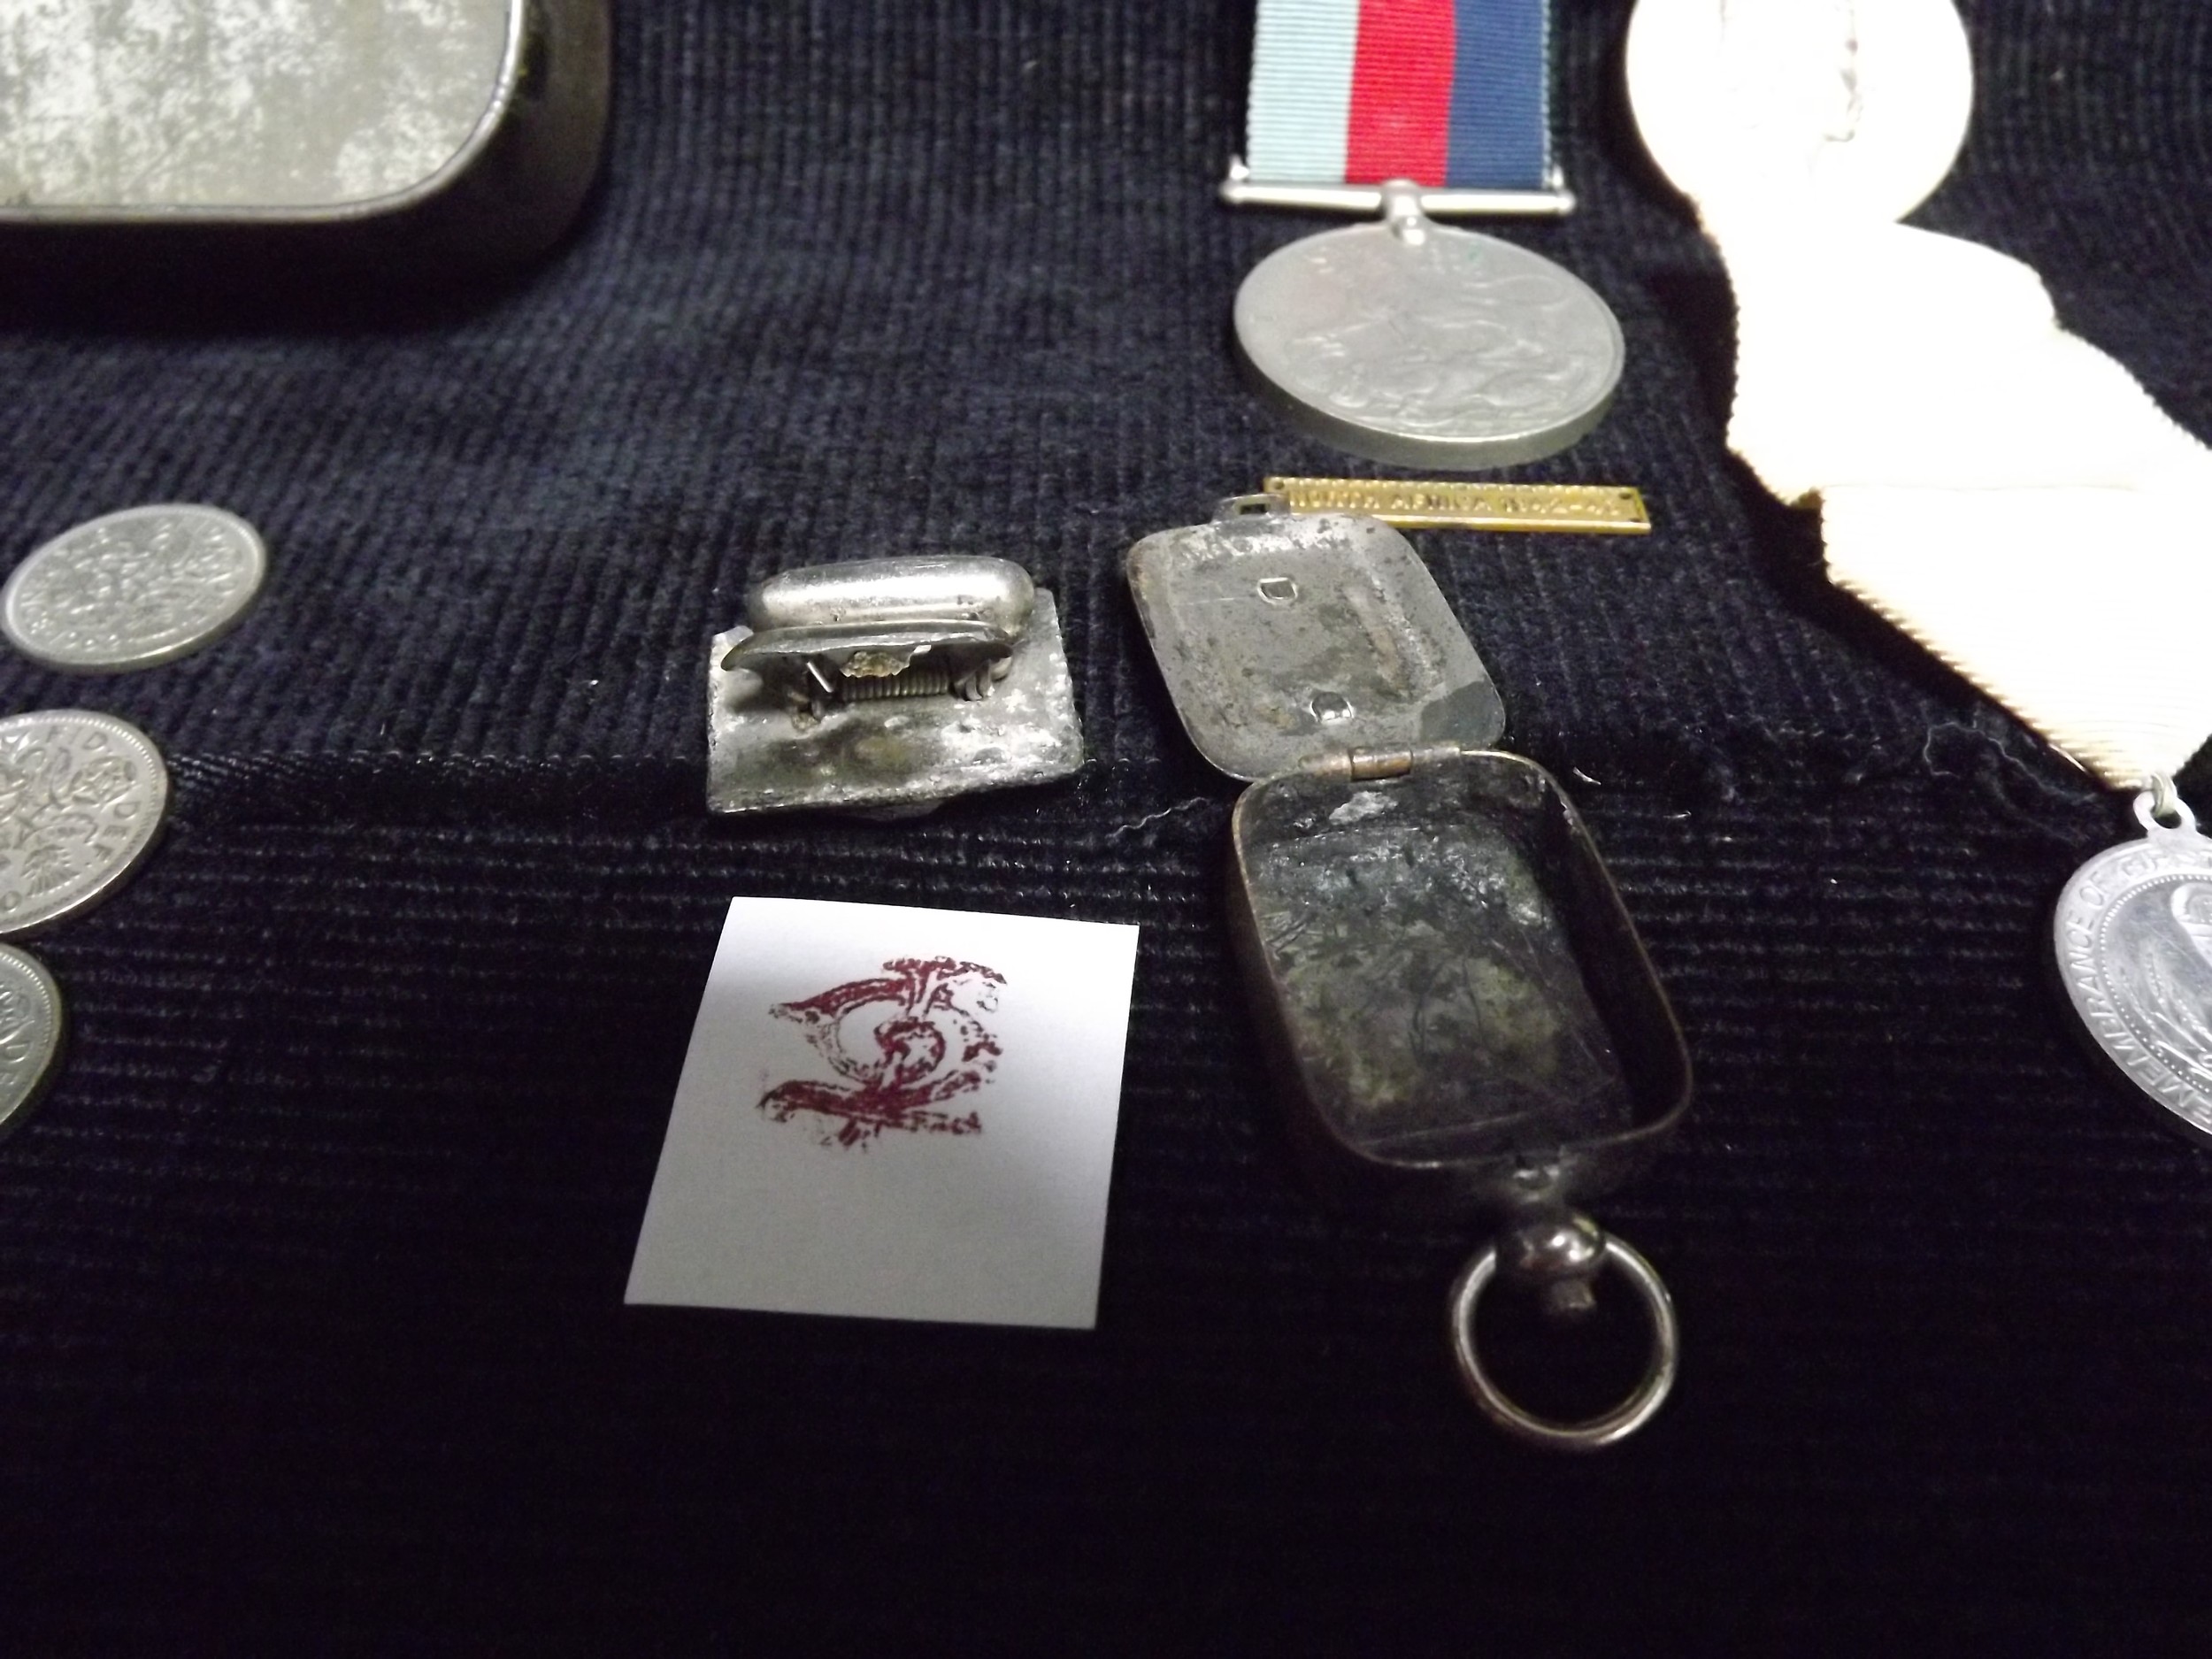 GB - Gentlemen's collection of Medals, Coins, Stamps, Pocket Watch, Metal cased Moniker Stamp and - Image 4 of 8